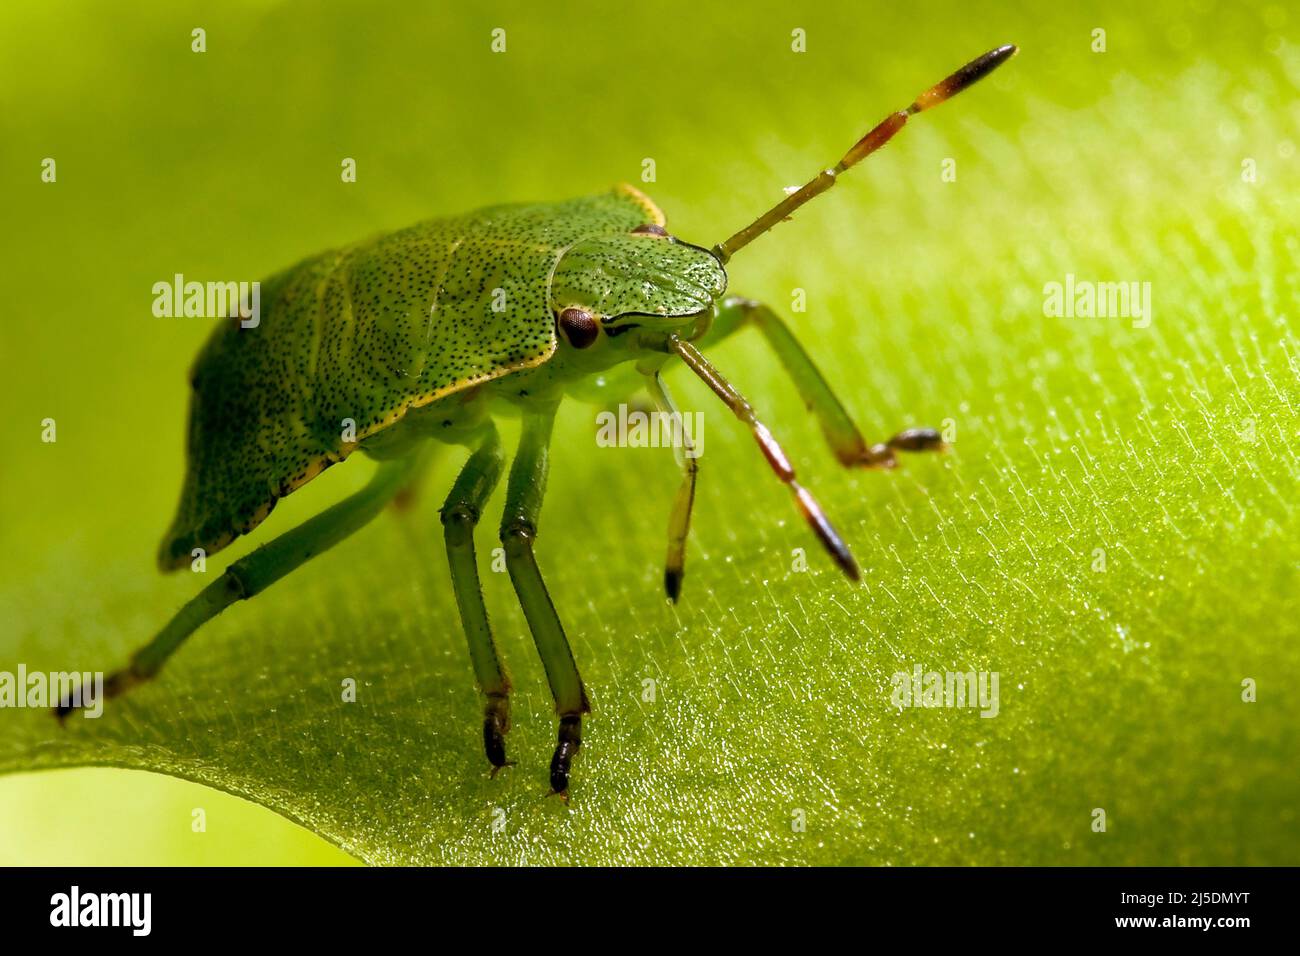 Green shield bug walks on a butterworts  leaf sticky and dangerous surface Stock Photo